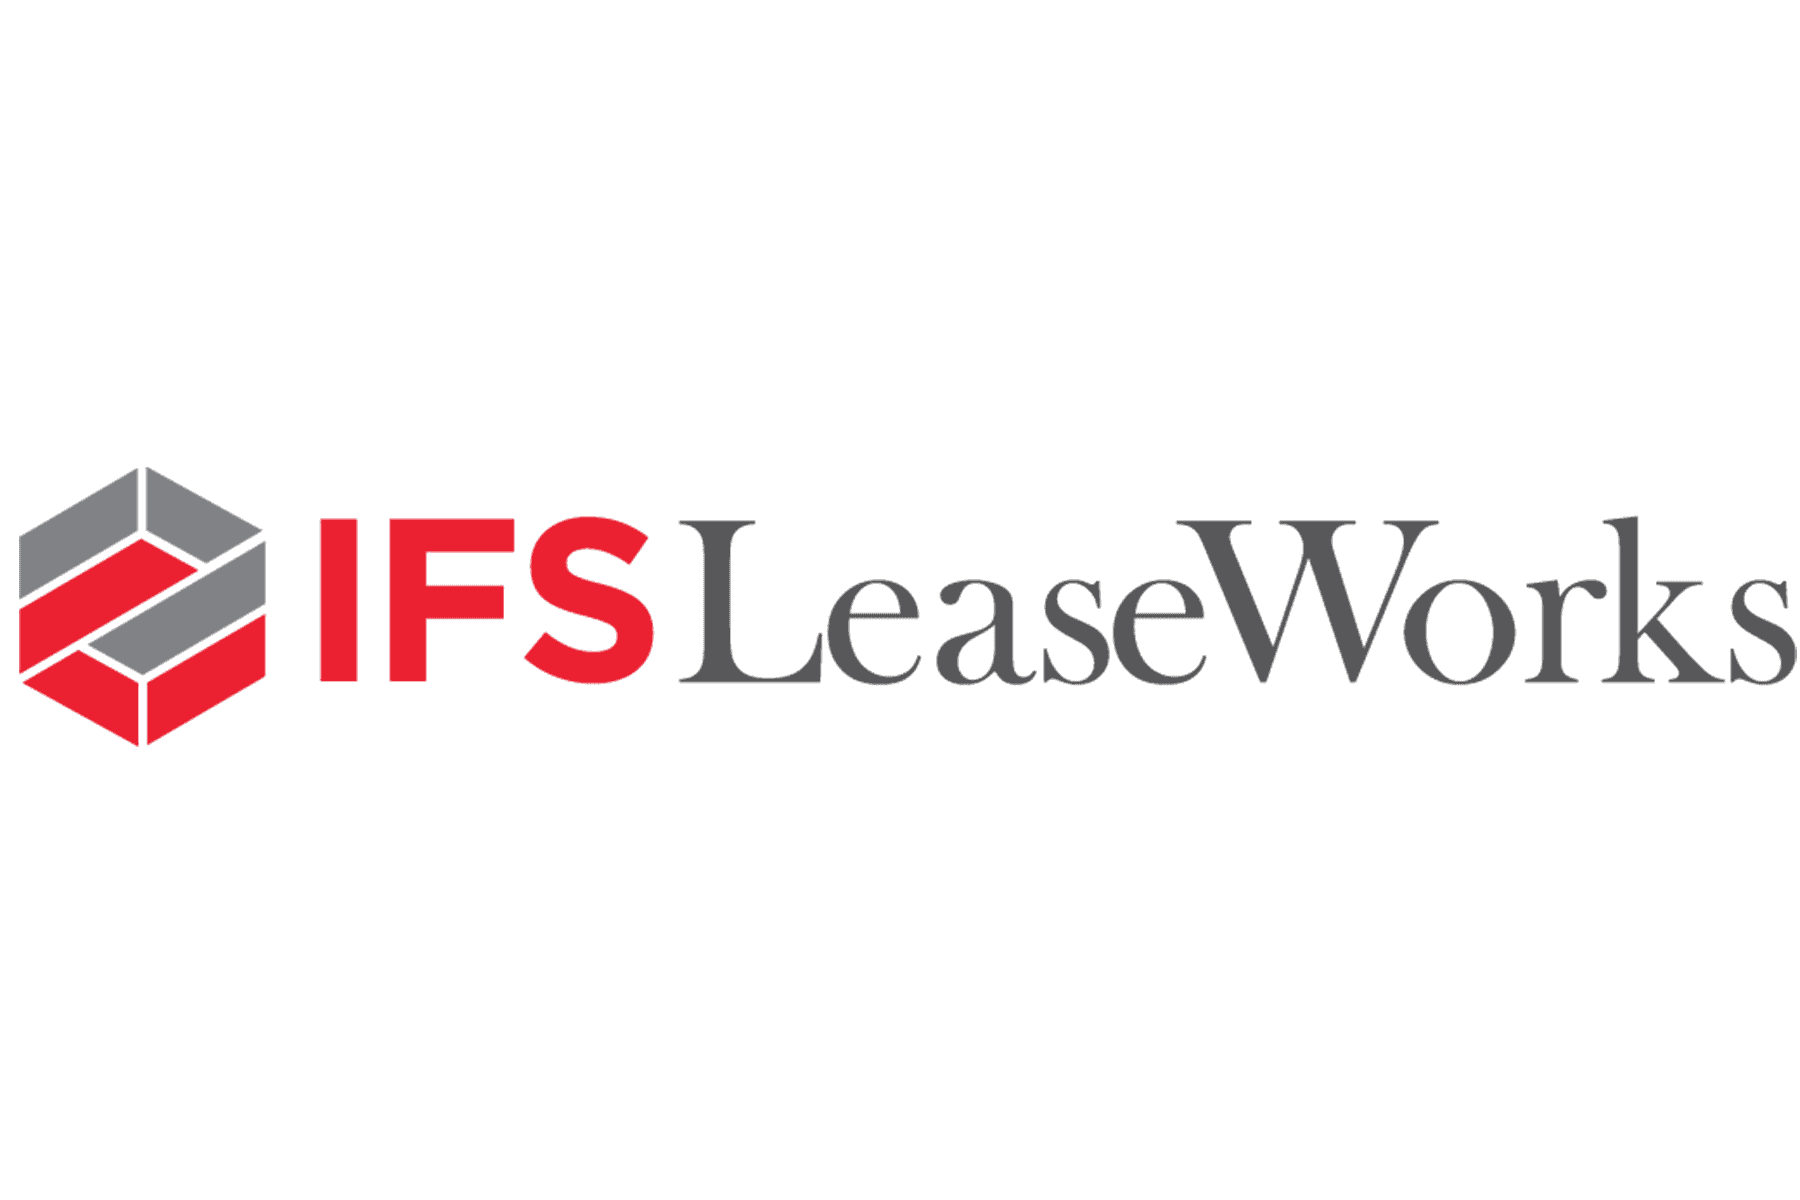 IFSLeaseWorks